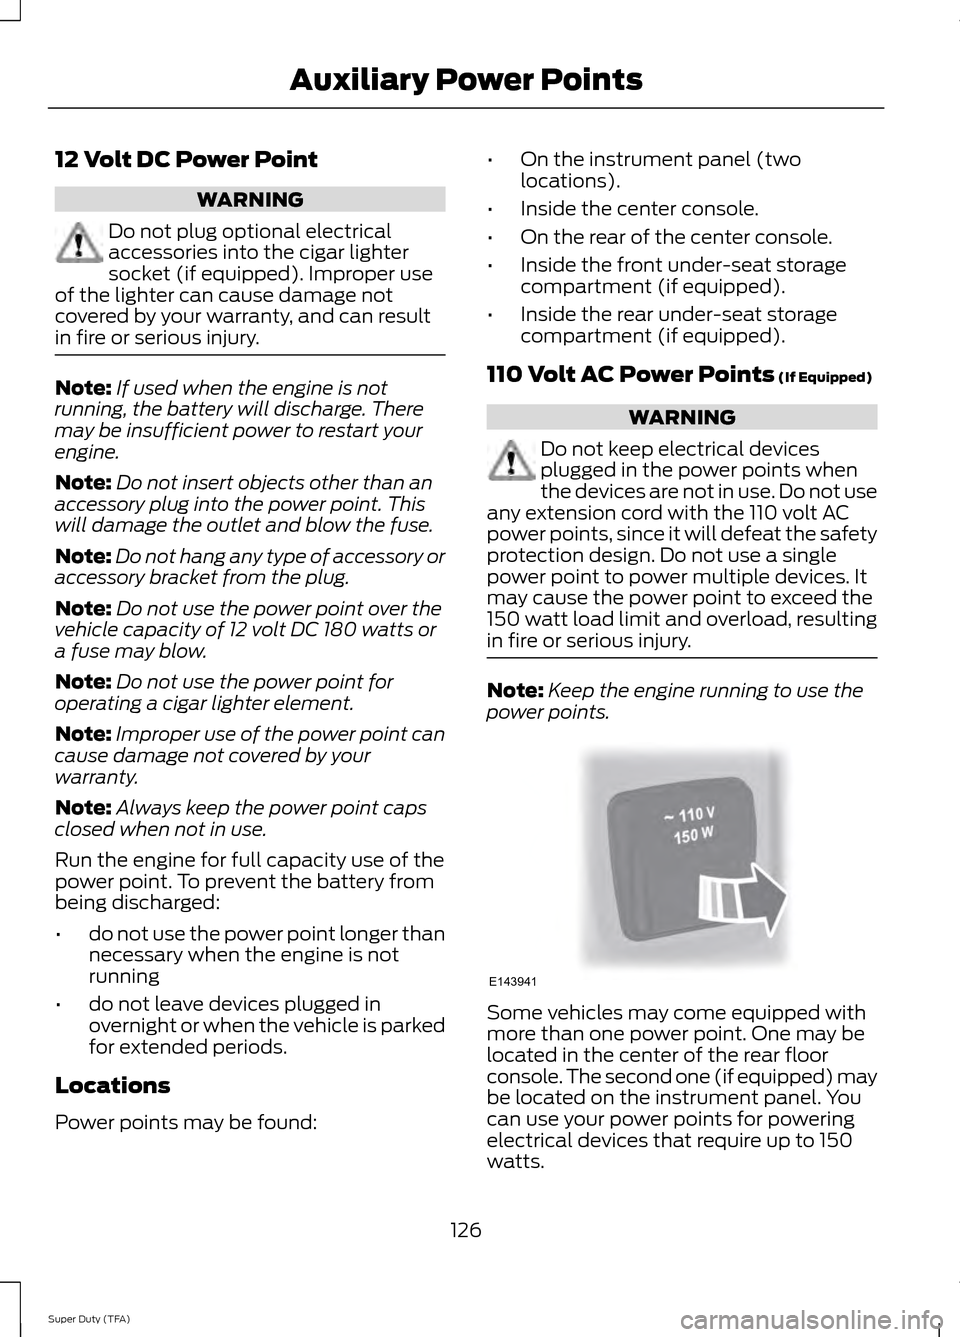 FORD SUPER DUTY 2014 3.G Owners Manual 12 Volt DC Power Point
WARNING
Do not plug optional electrical
accessories into the cigar lighter
socket (if equipped). Improper use
of the lighter can cause damage not
covered by your warranty, and c